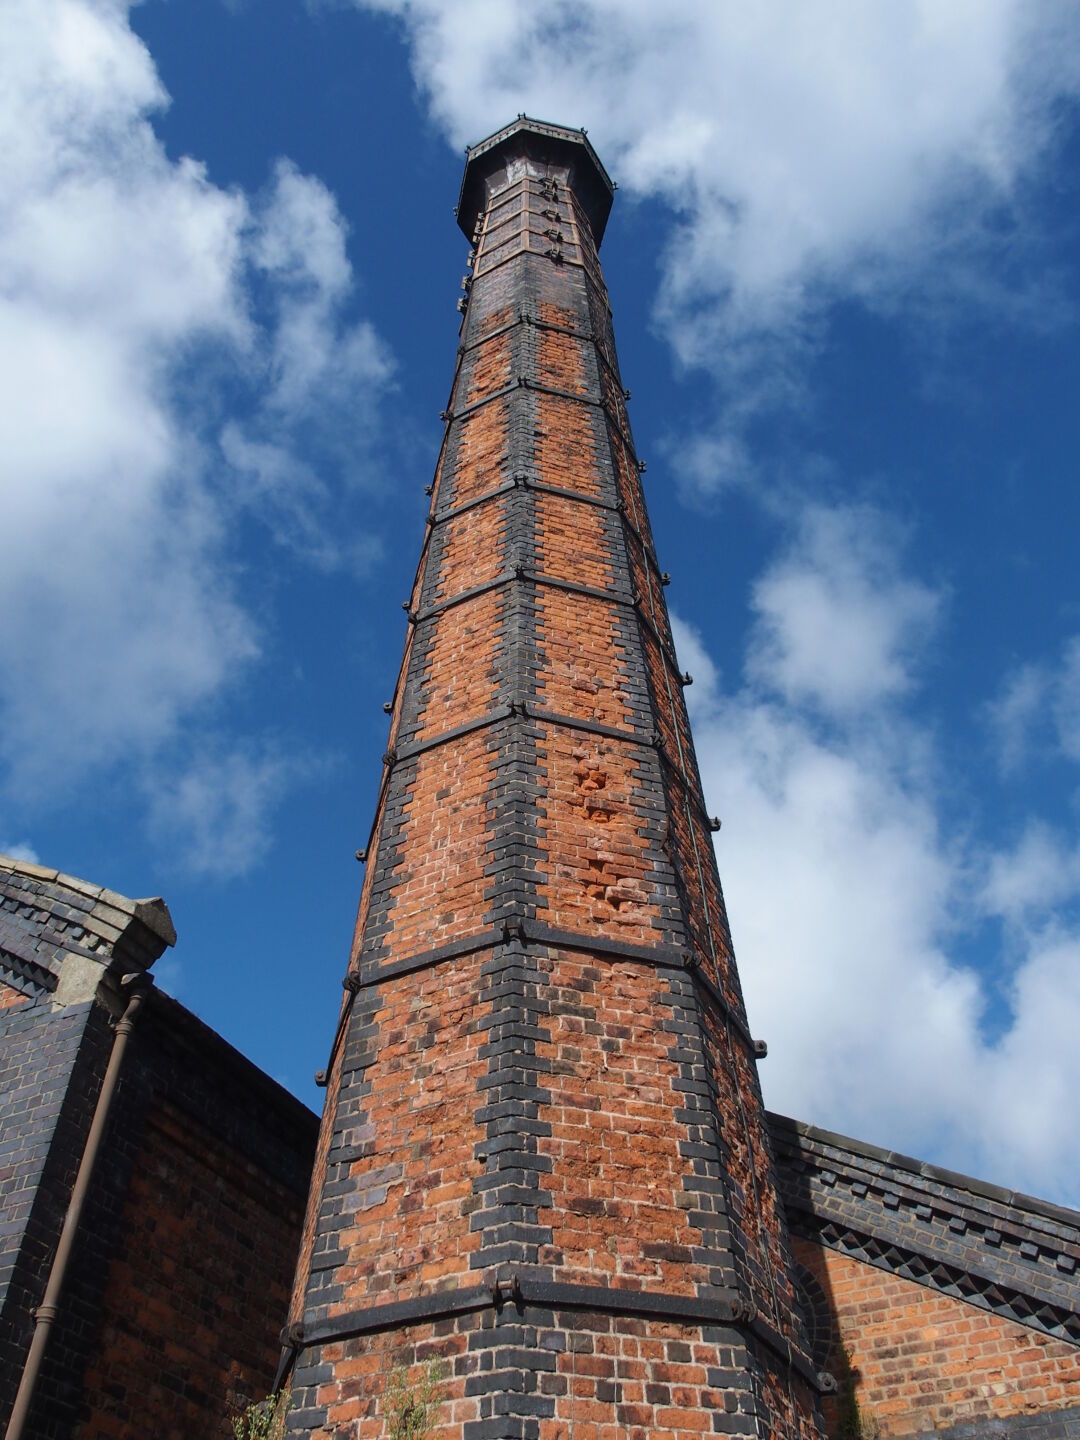 Chimney at the National Waterways Museum.